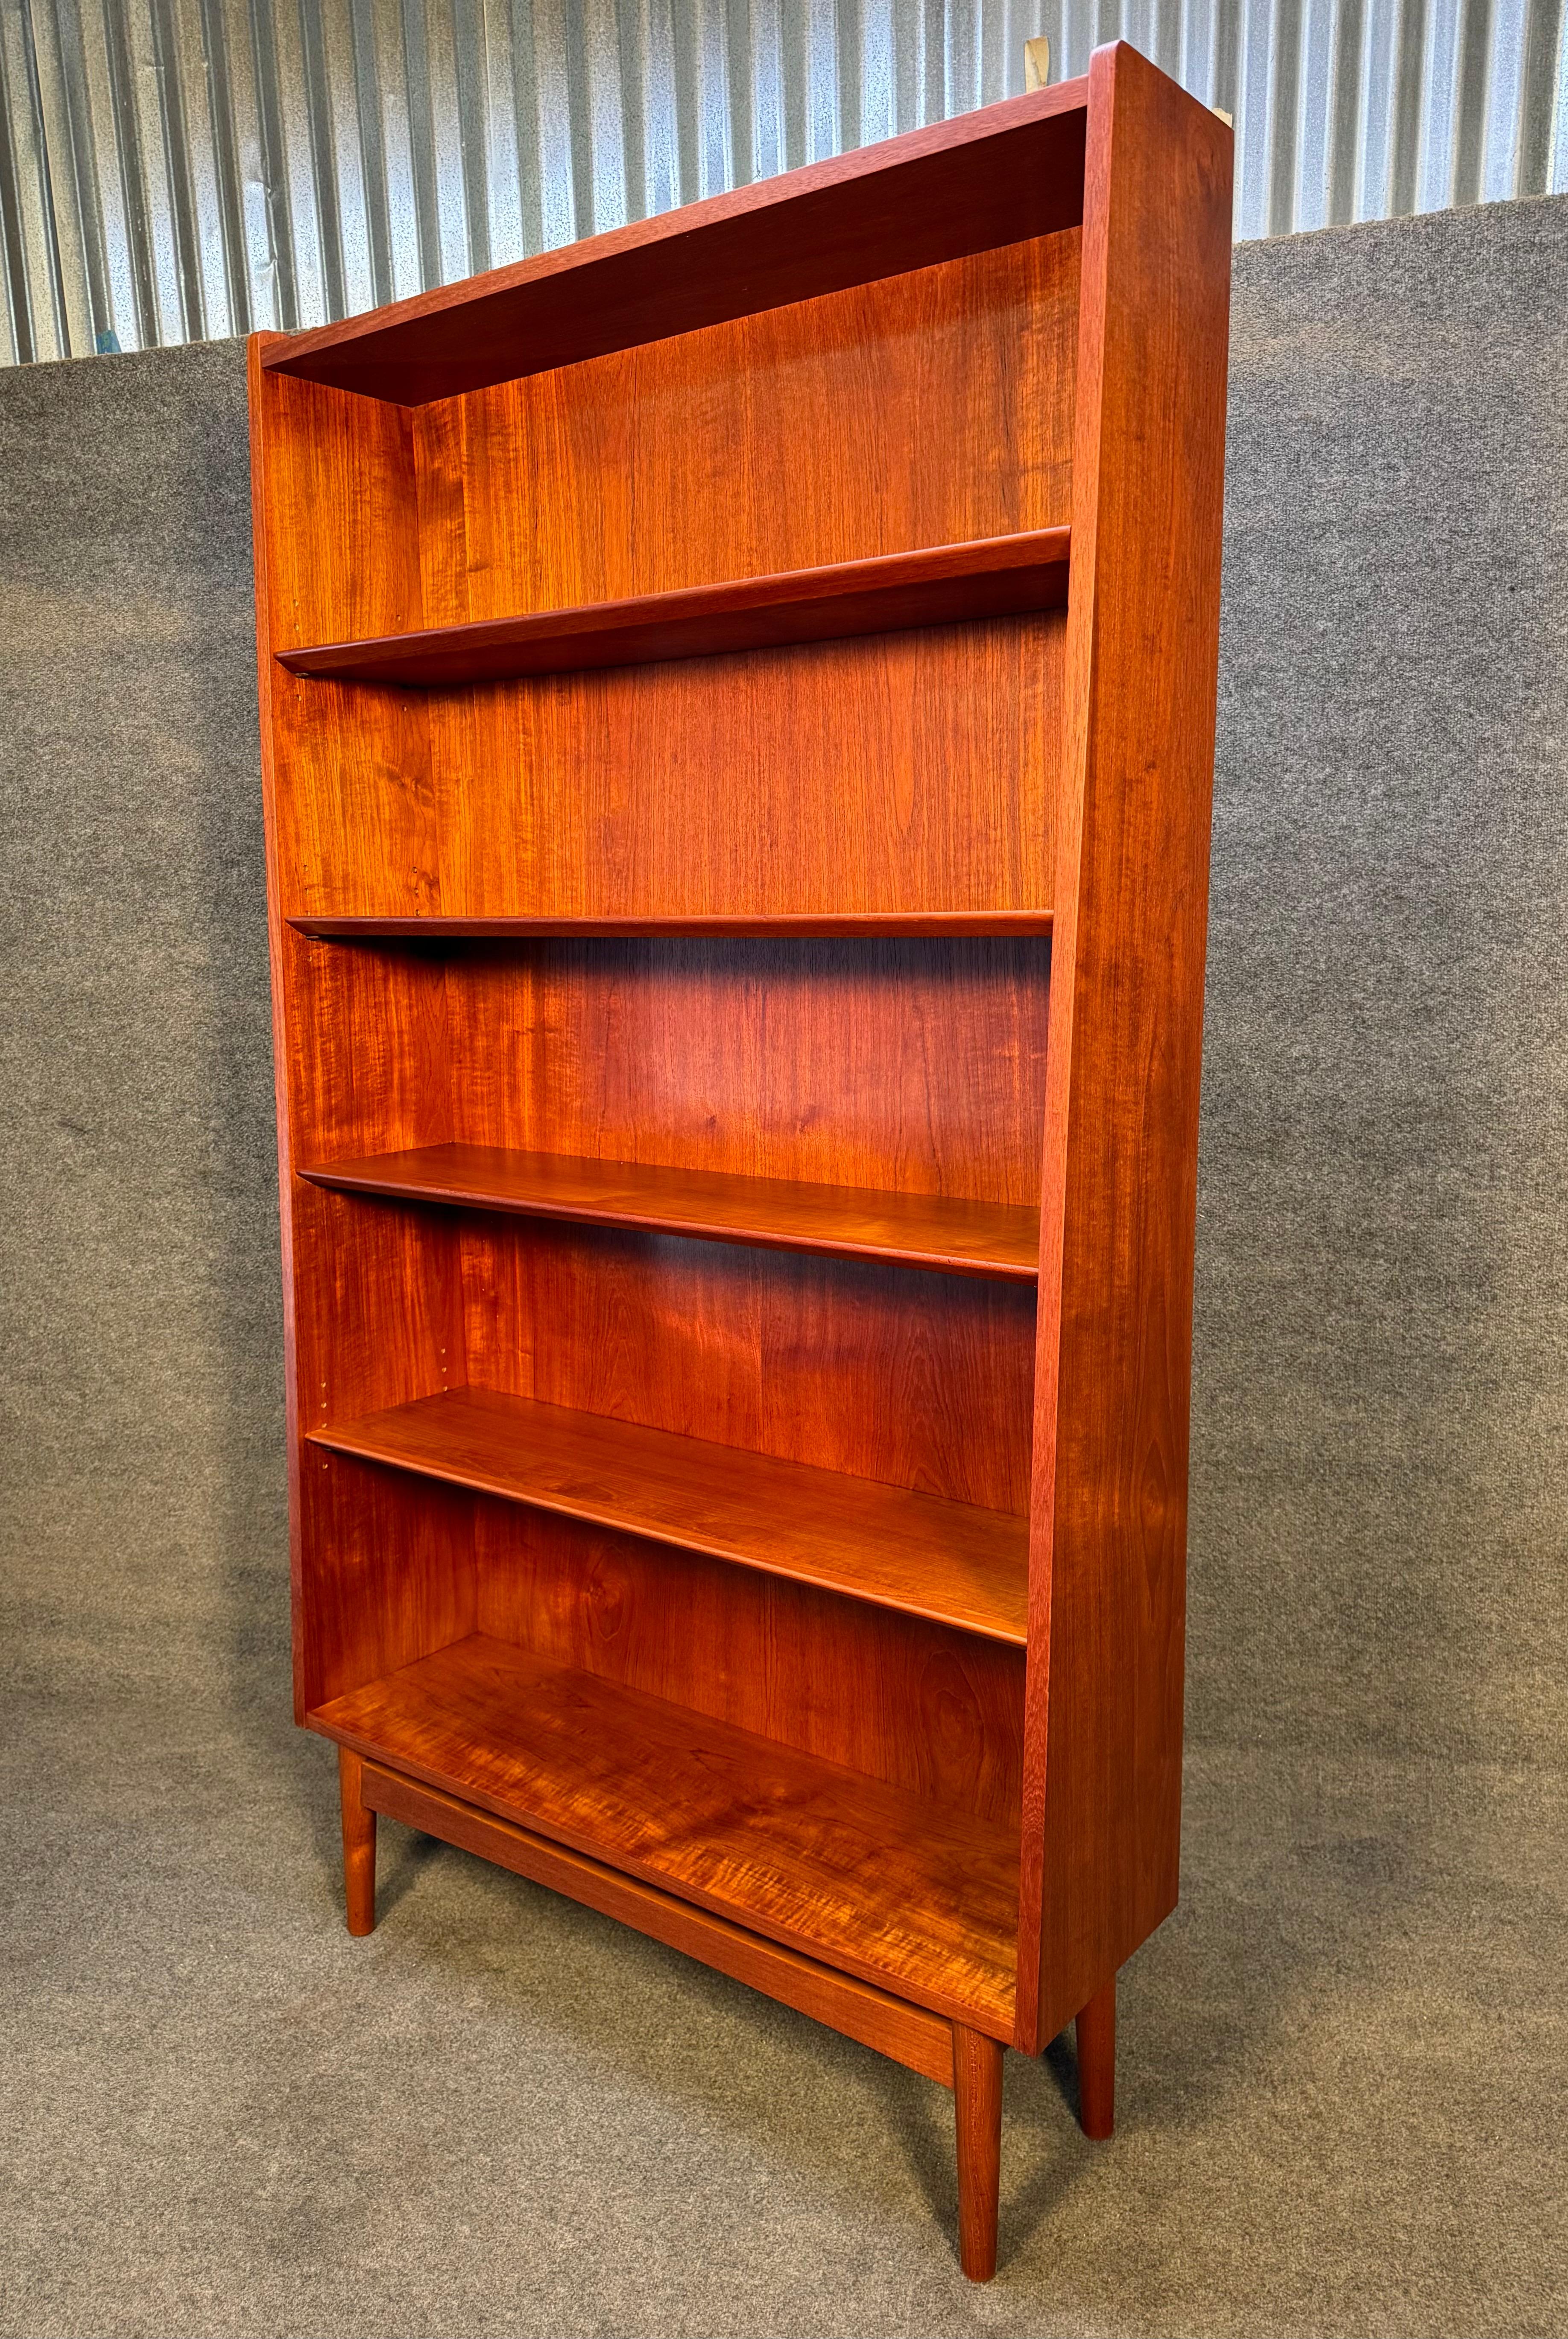 Vintage Danish Mid Century Modern Teak Bookcase by Johannes Sorth In Good Condition For Sale In San Marcos, CA